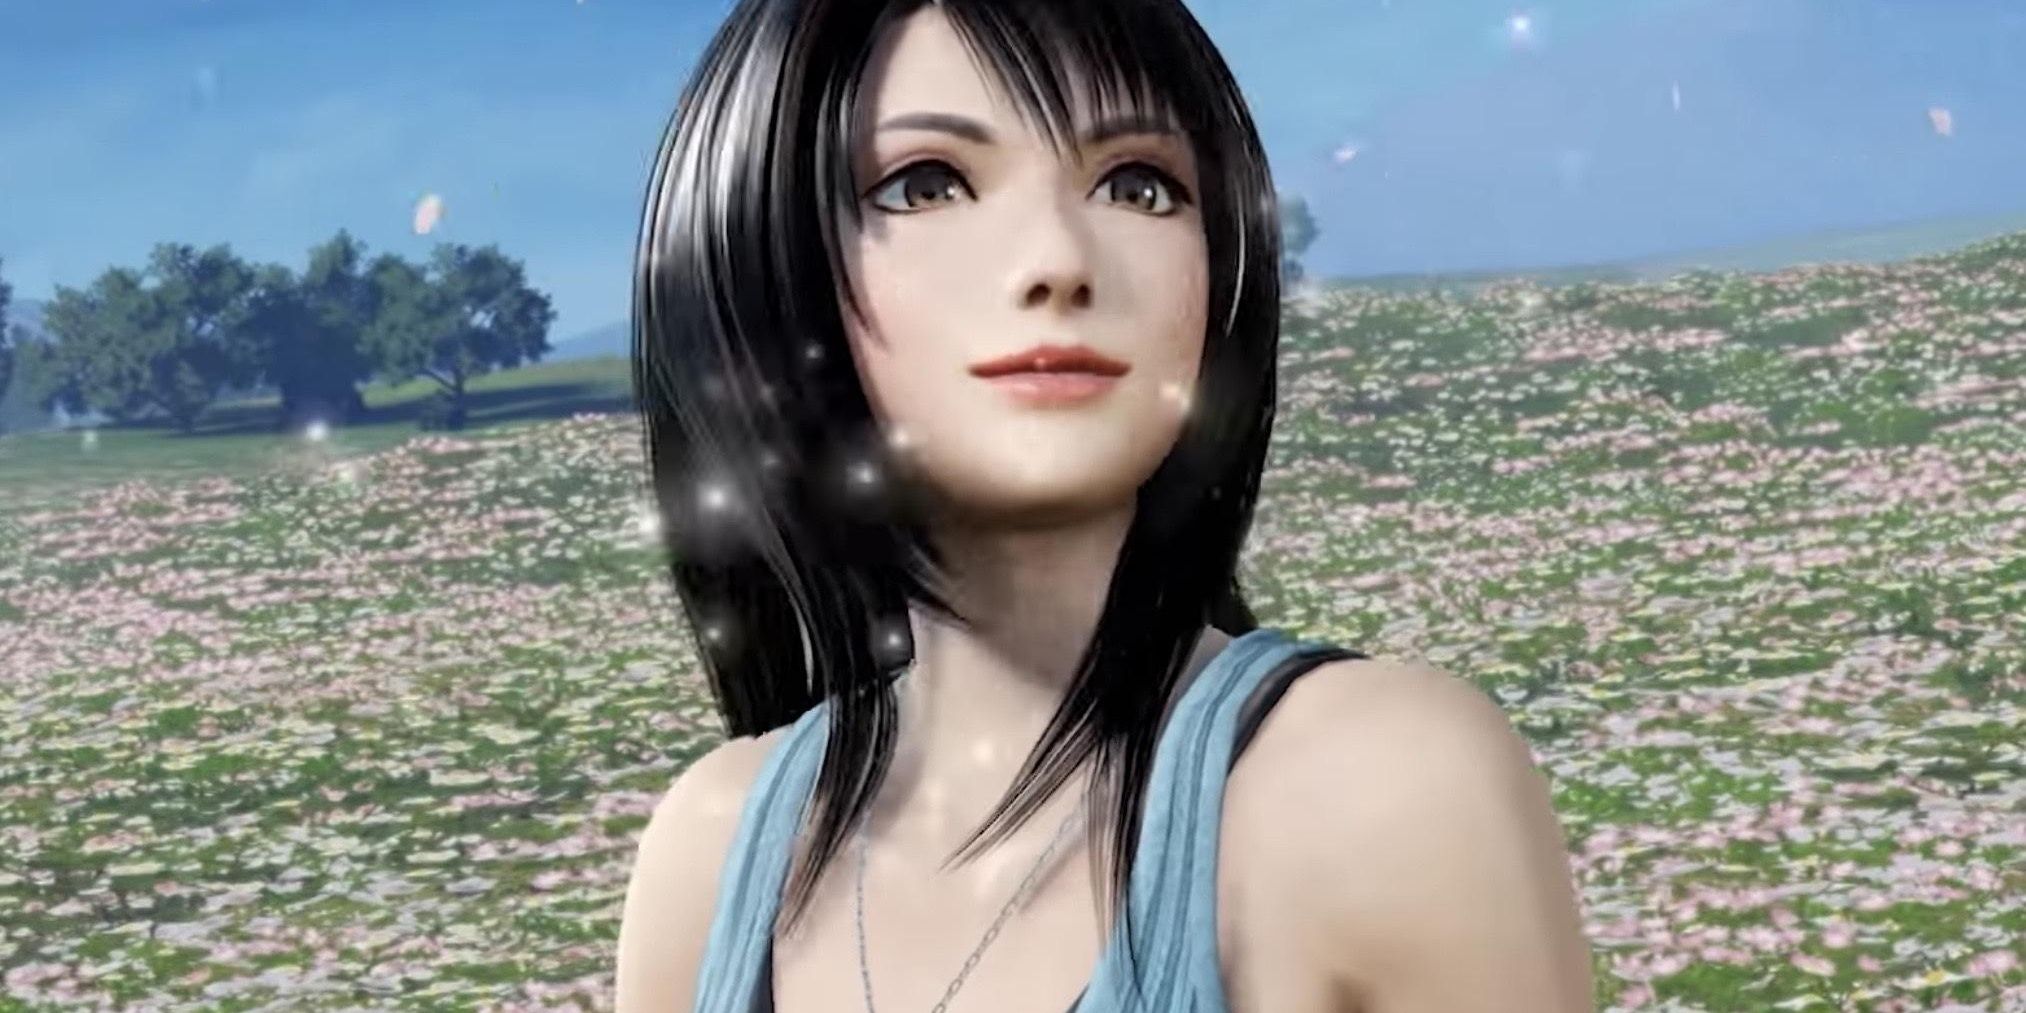 Final Fantasy 8 Rinoa IN A Field Full With Roses